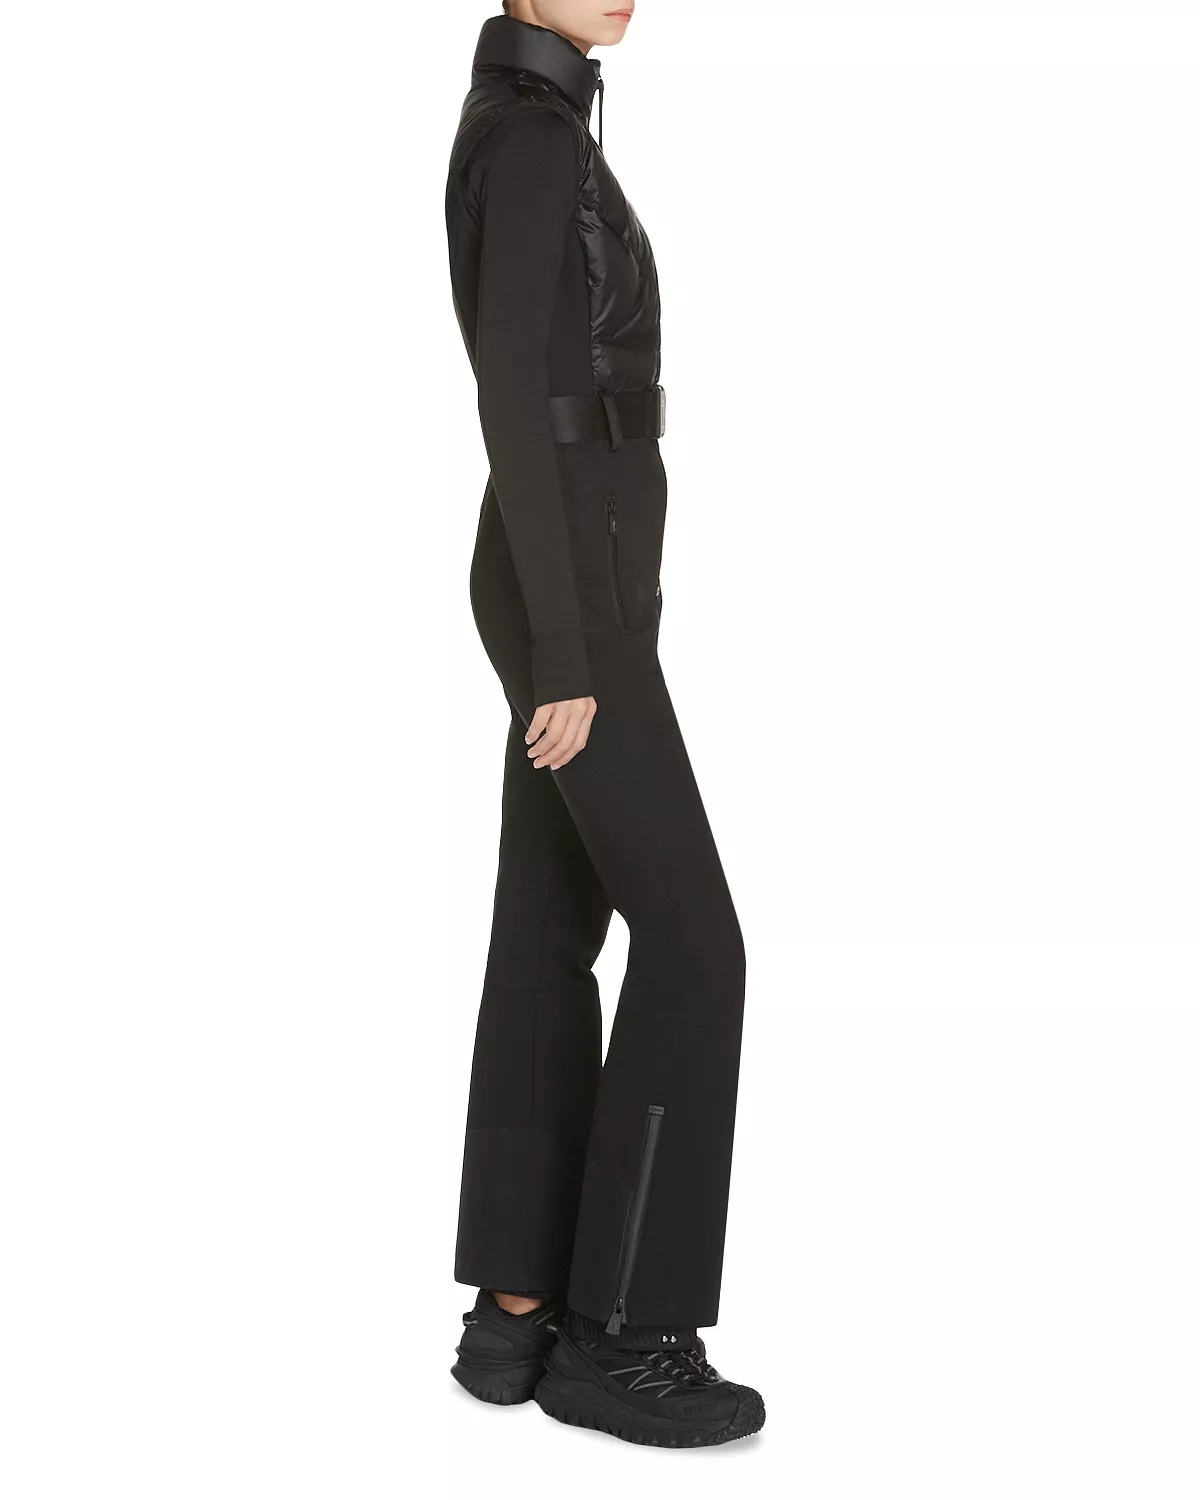 All in One Flared Leg Jumpsuit - 3